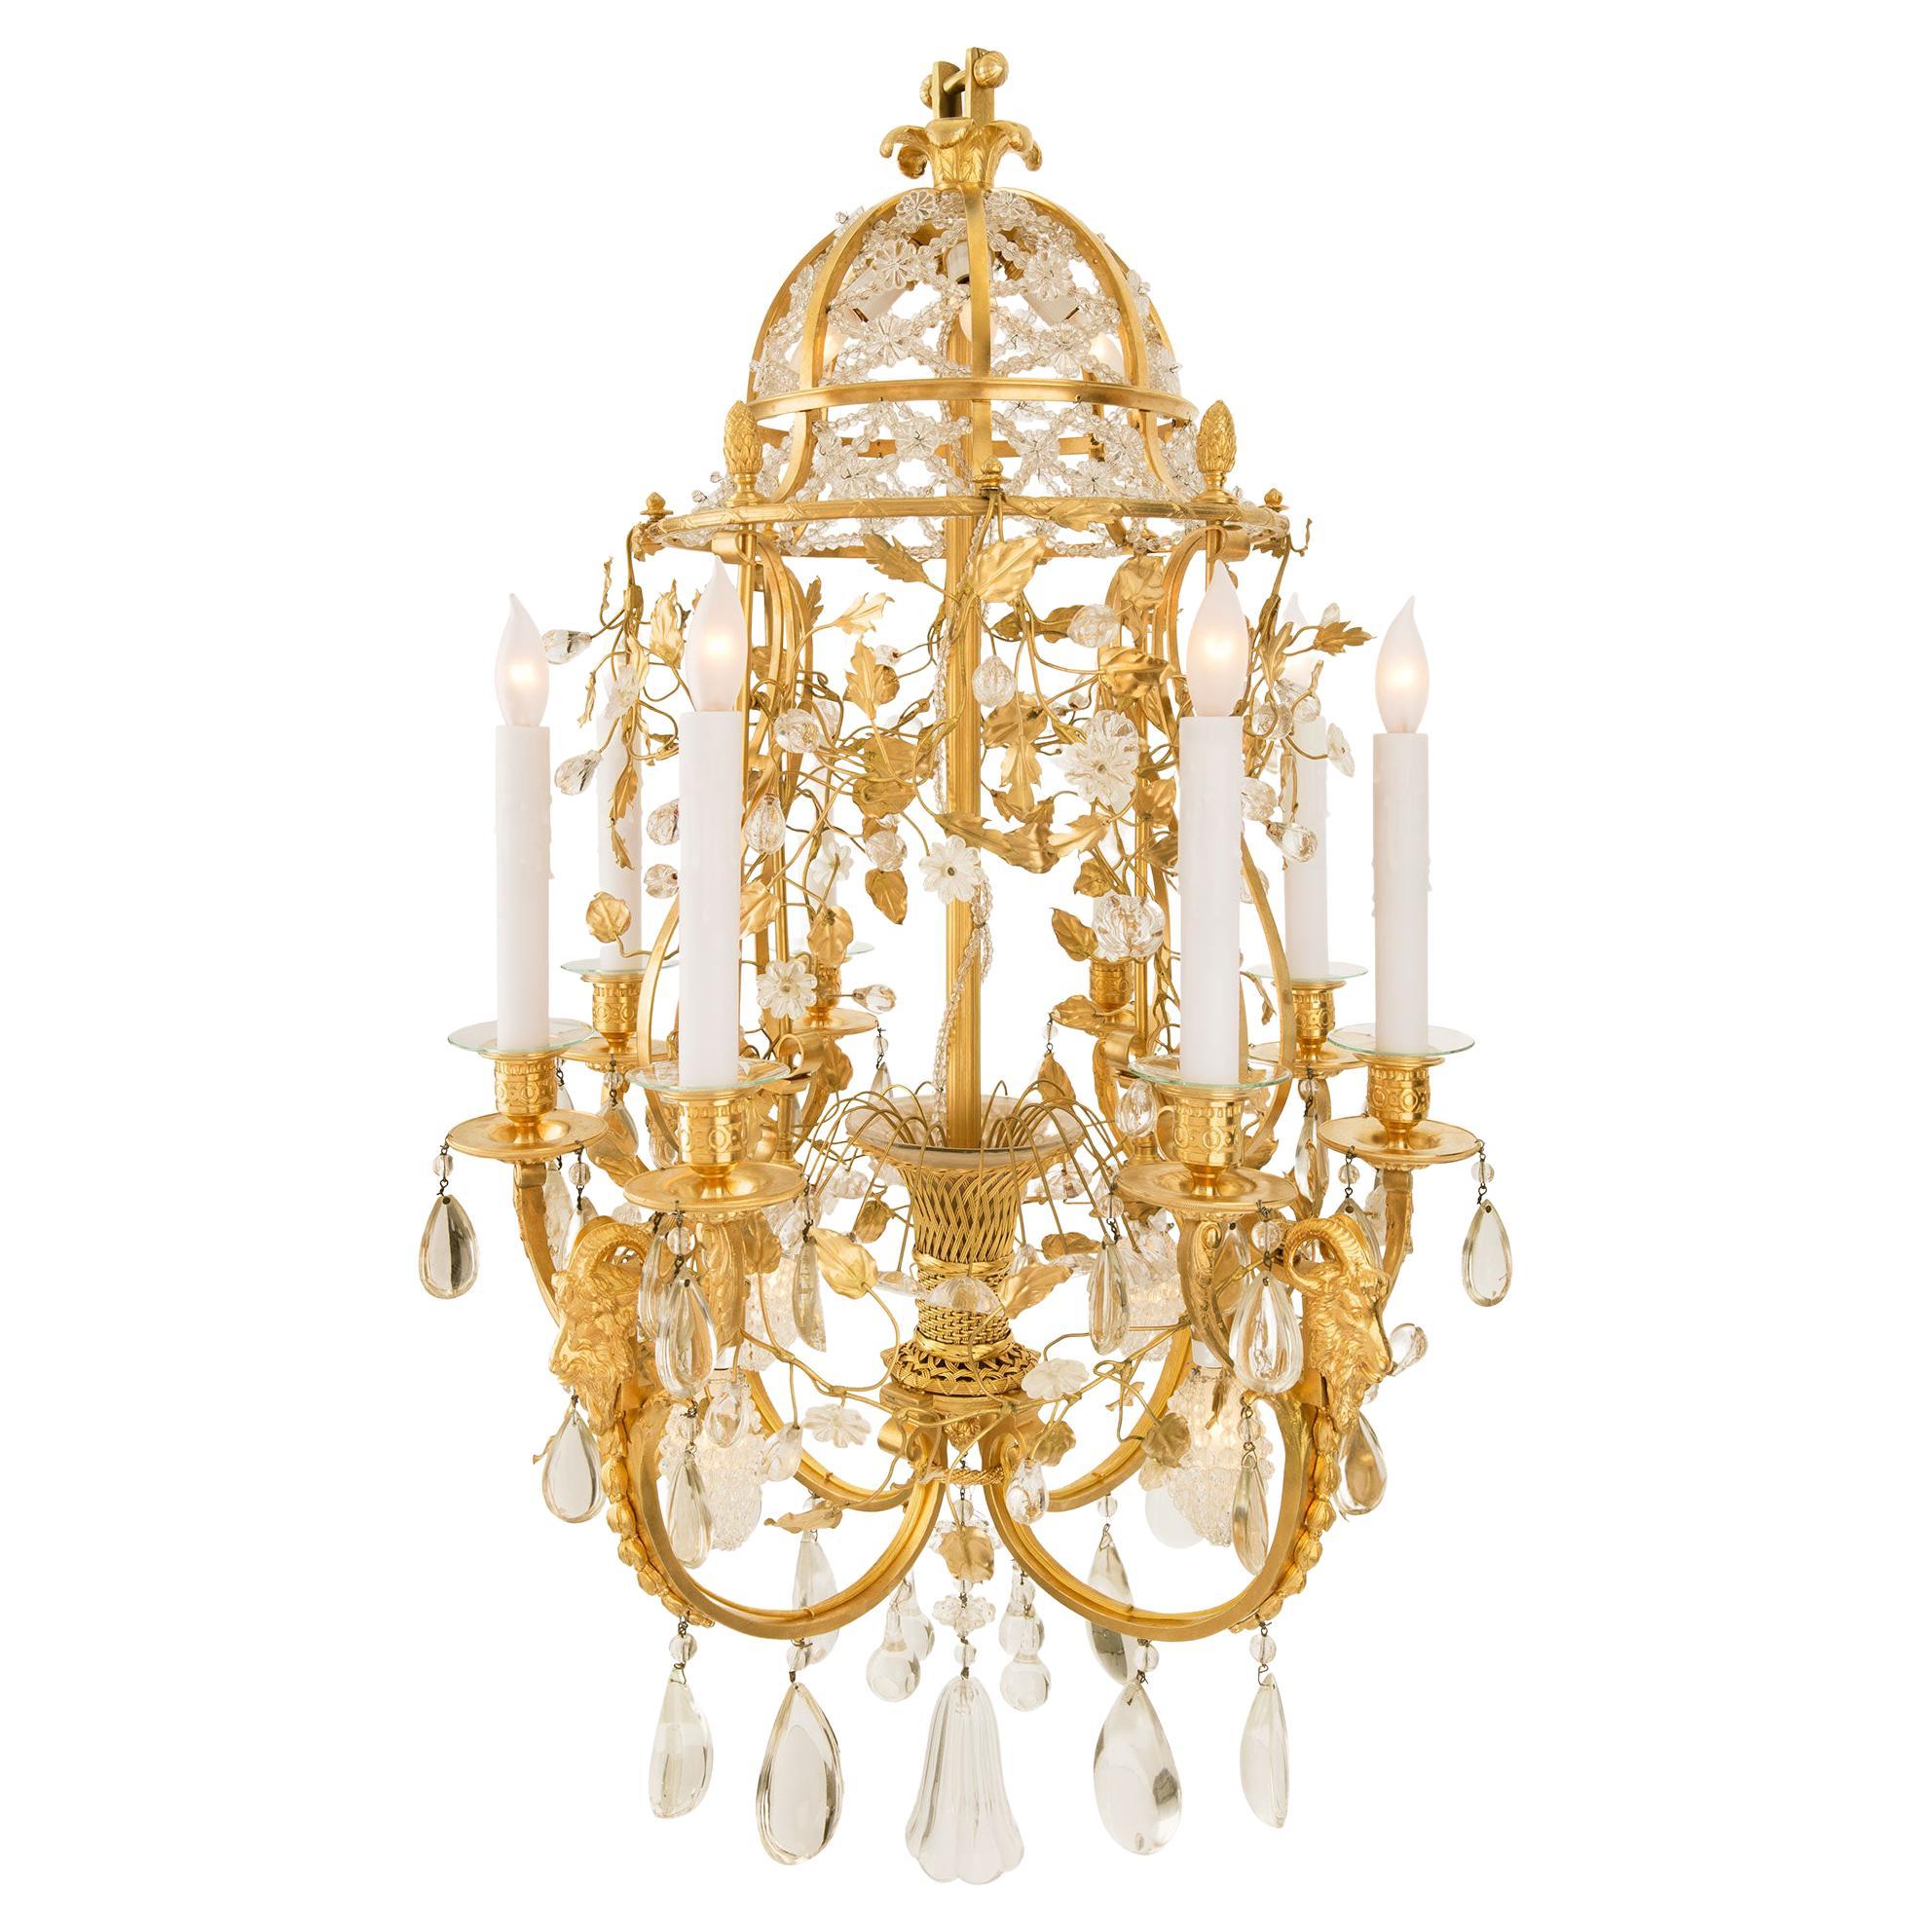 French 19th Century Belle Époque Period Ormolu and Baccarat Crystal Chandelier For Sale